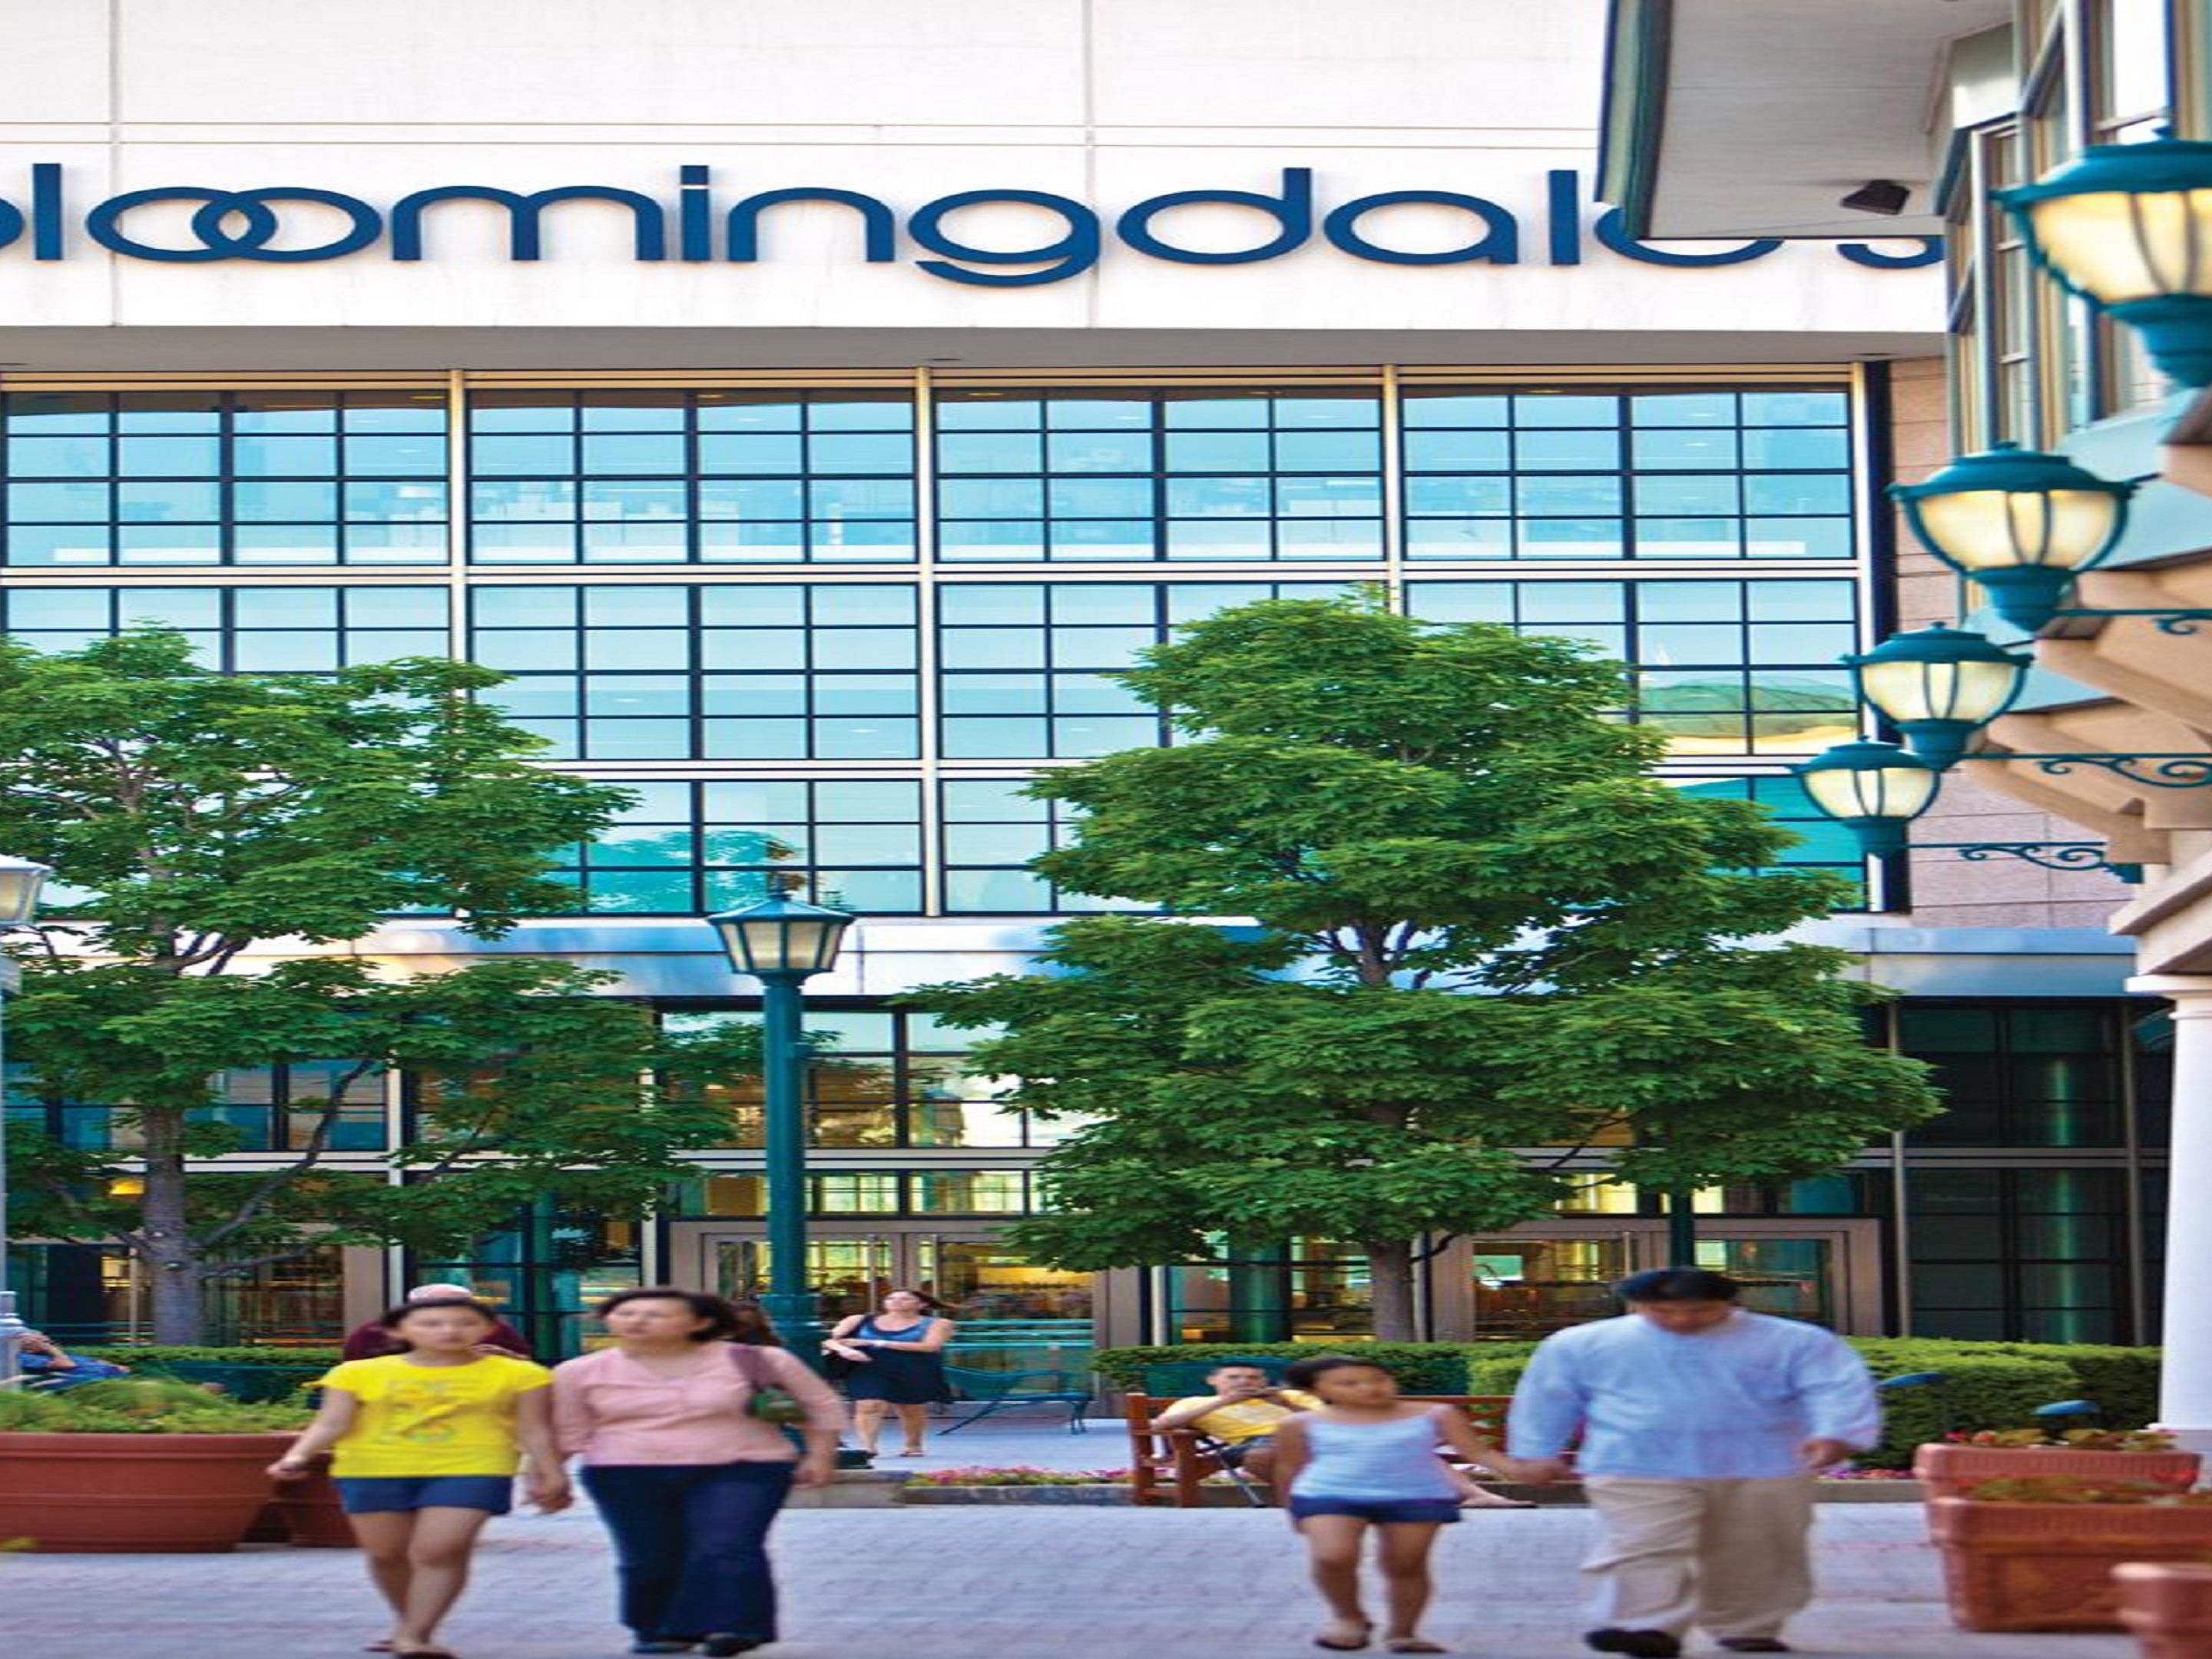 Upscale outdoor shopping mall with department stores, brand-name fashion retailers & chain eateries.